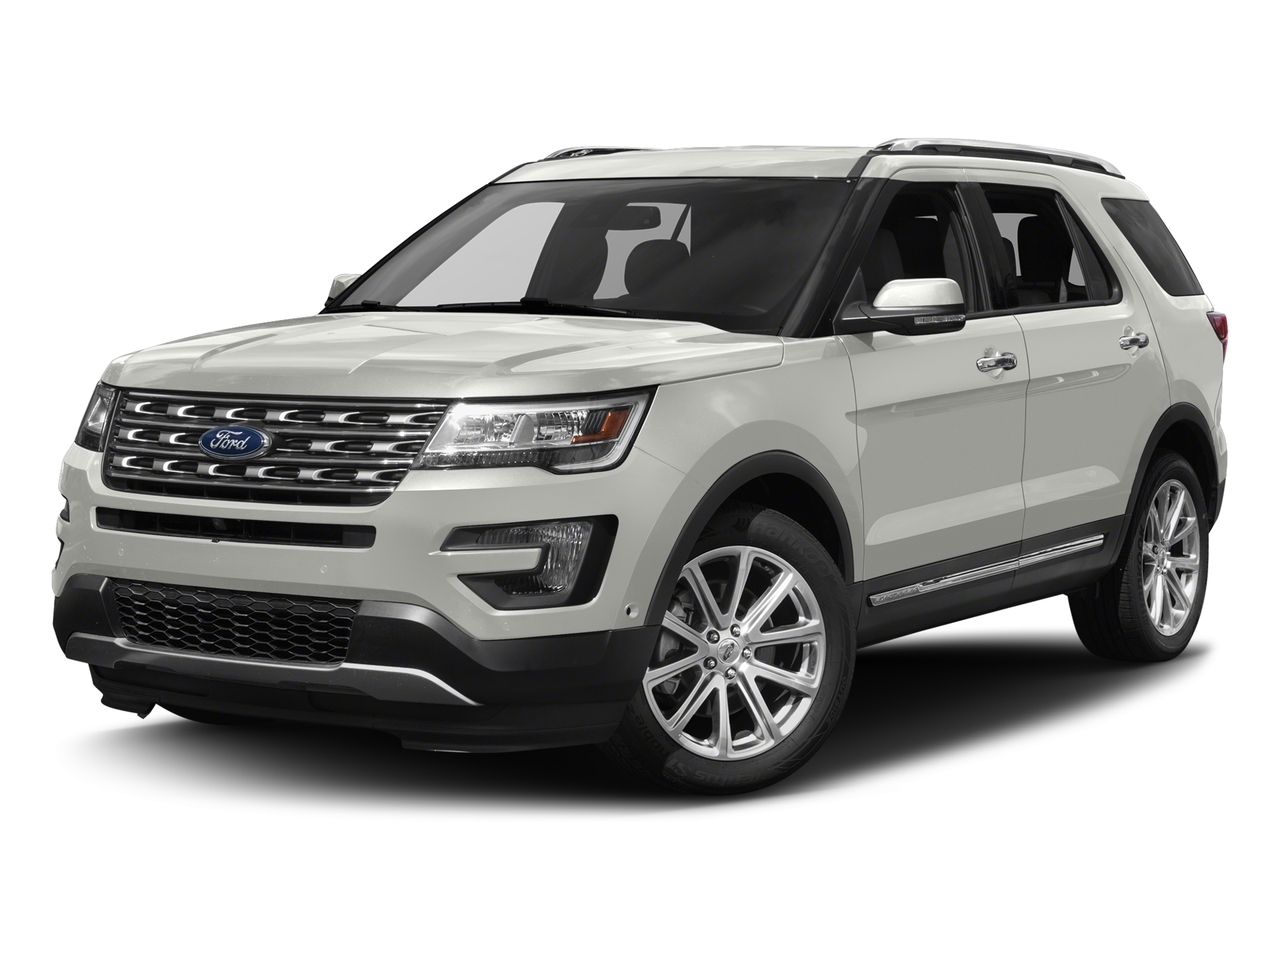 2017 Ford Explorer 4WD LIMITED | LOW KM's | LOCAL TRADE